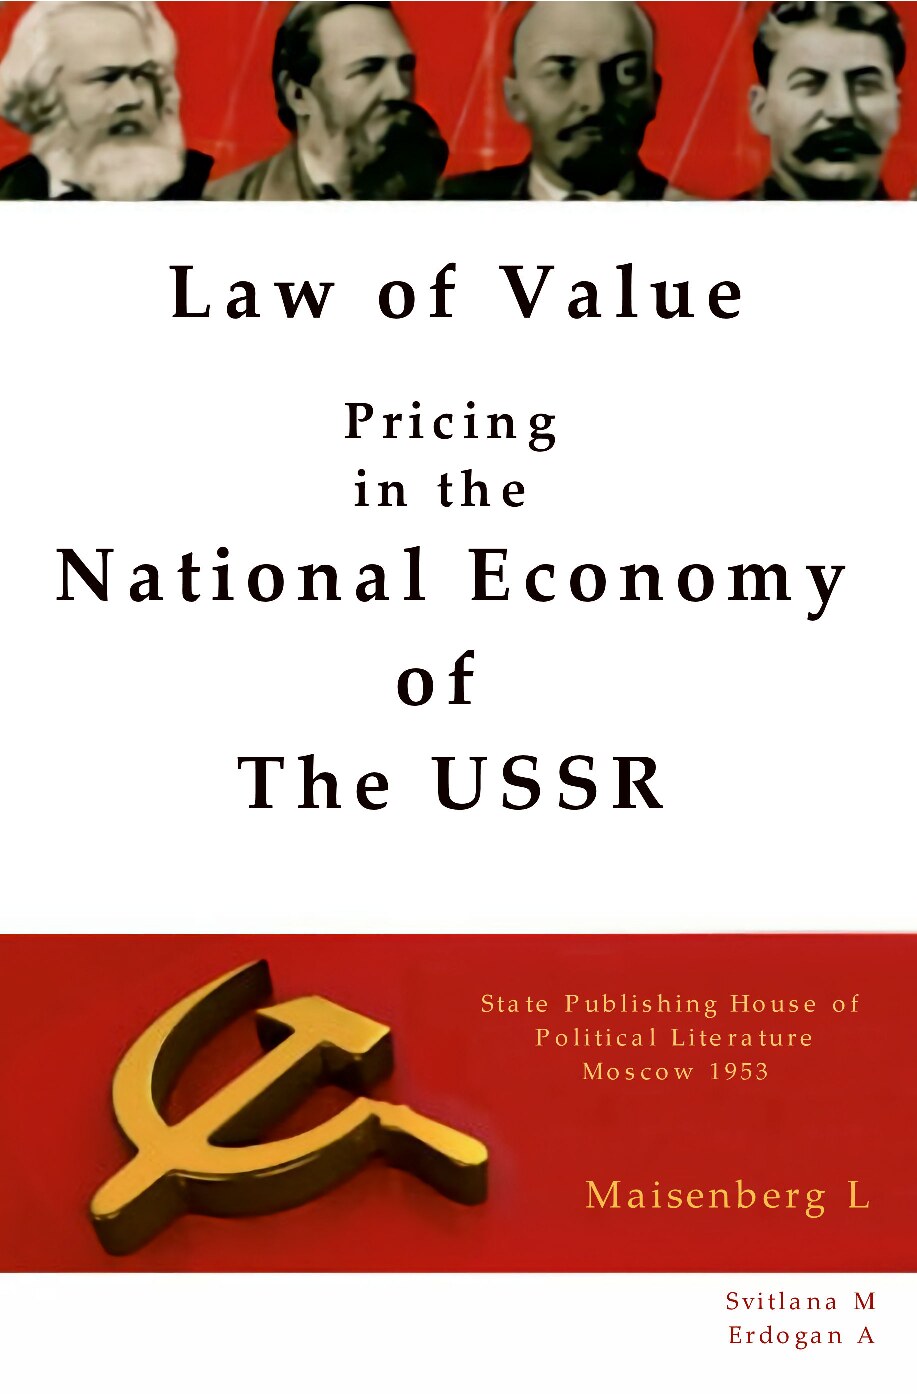 Law of Value - Pricing in the national economy of  the USSR